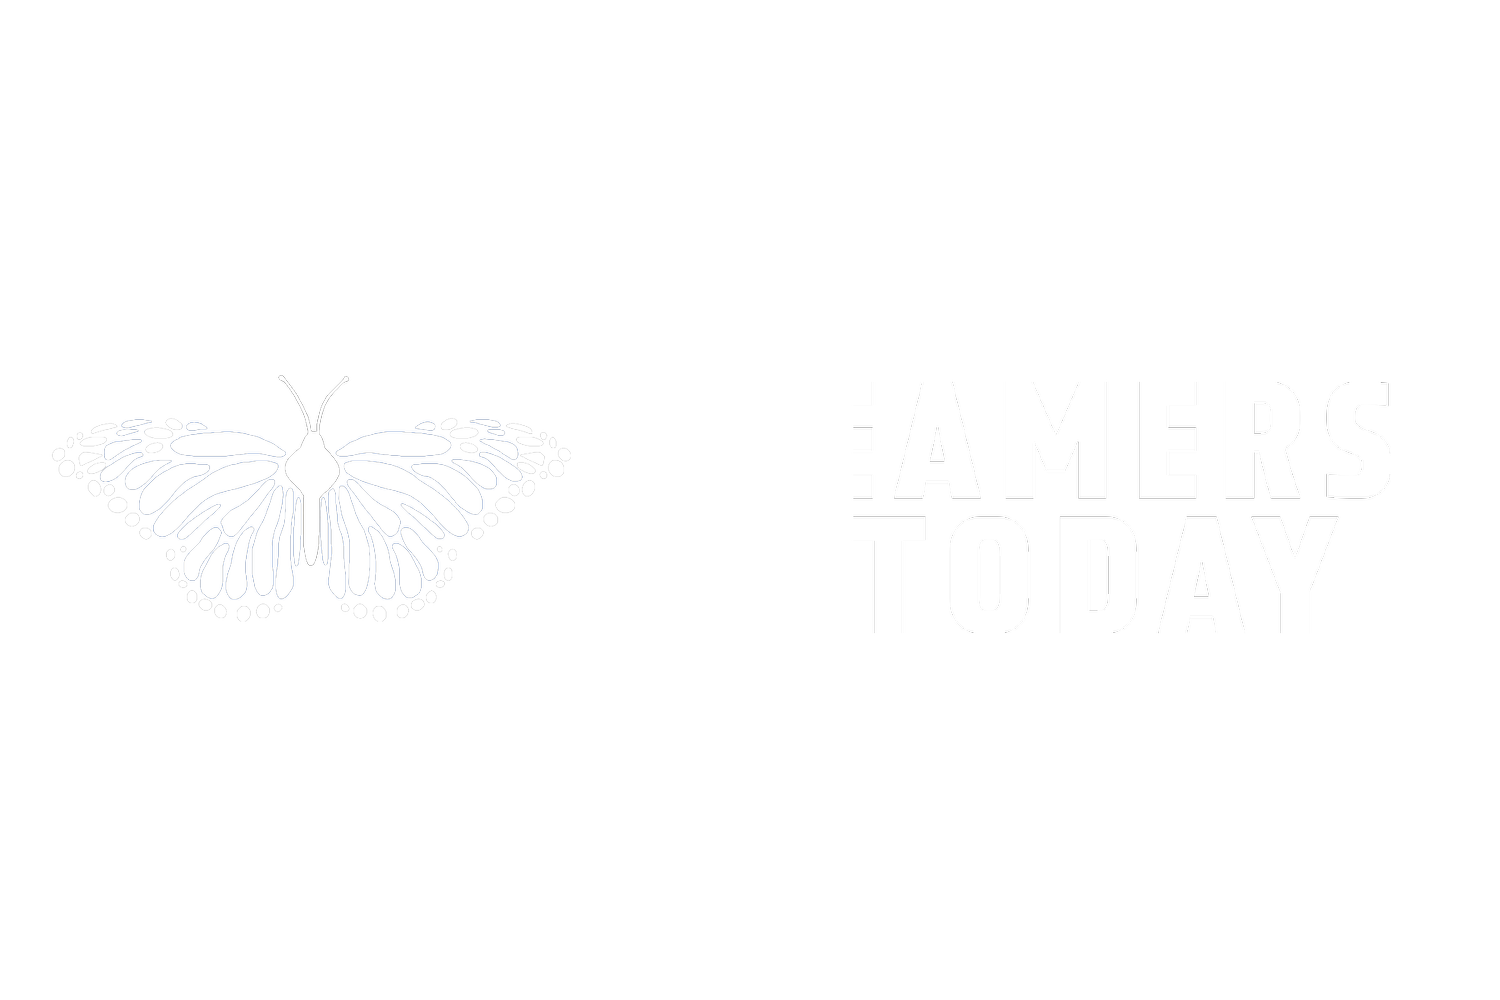 Dreamers of Today